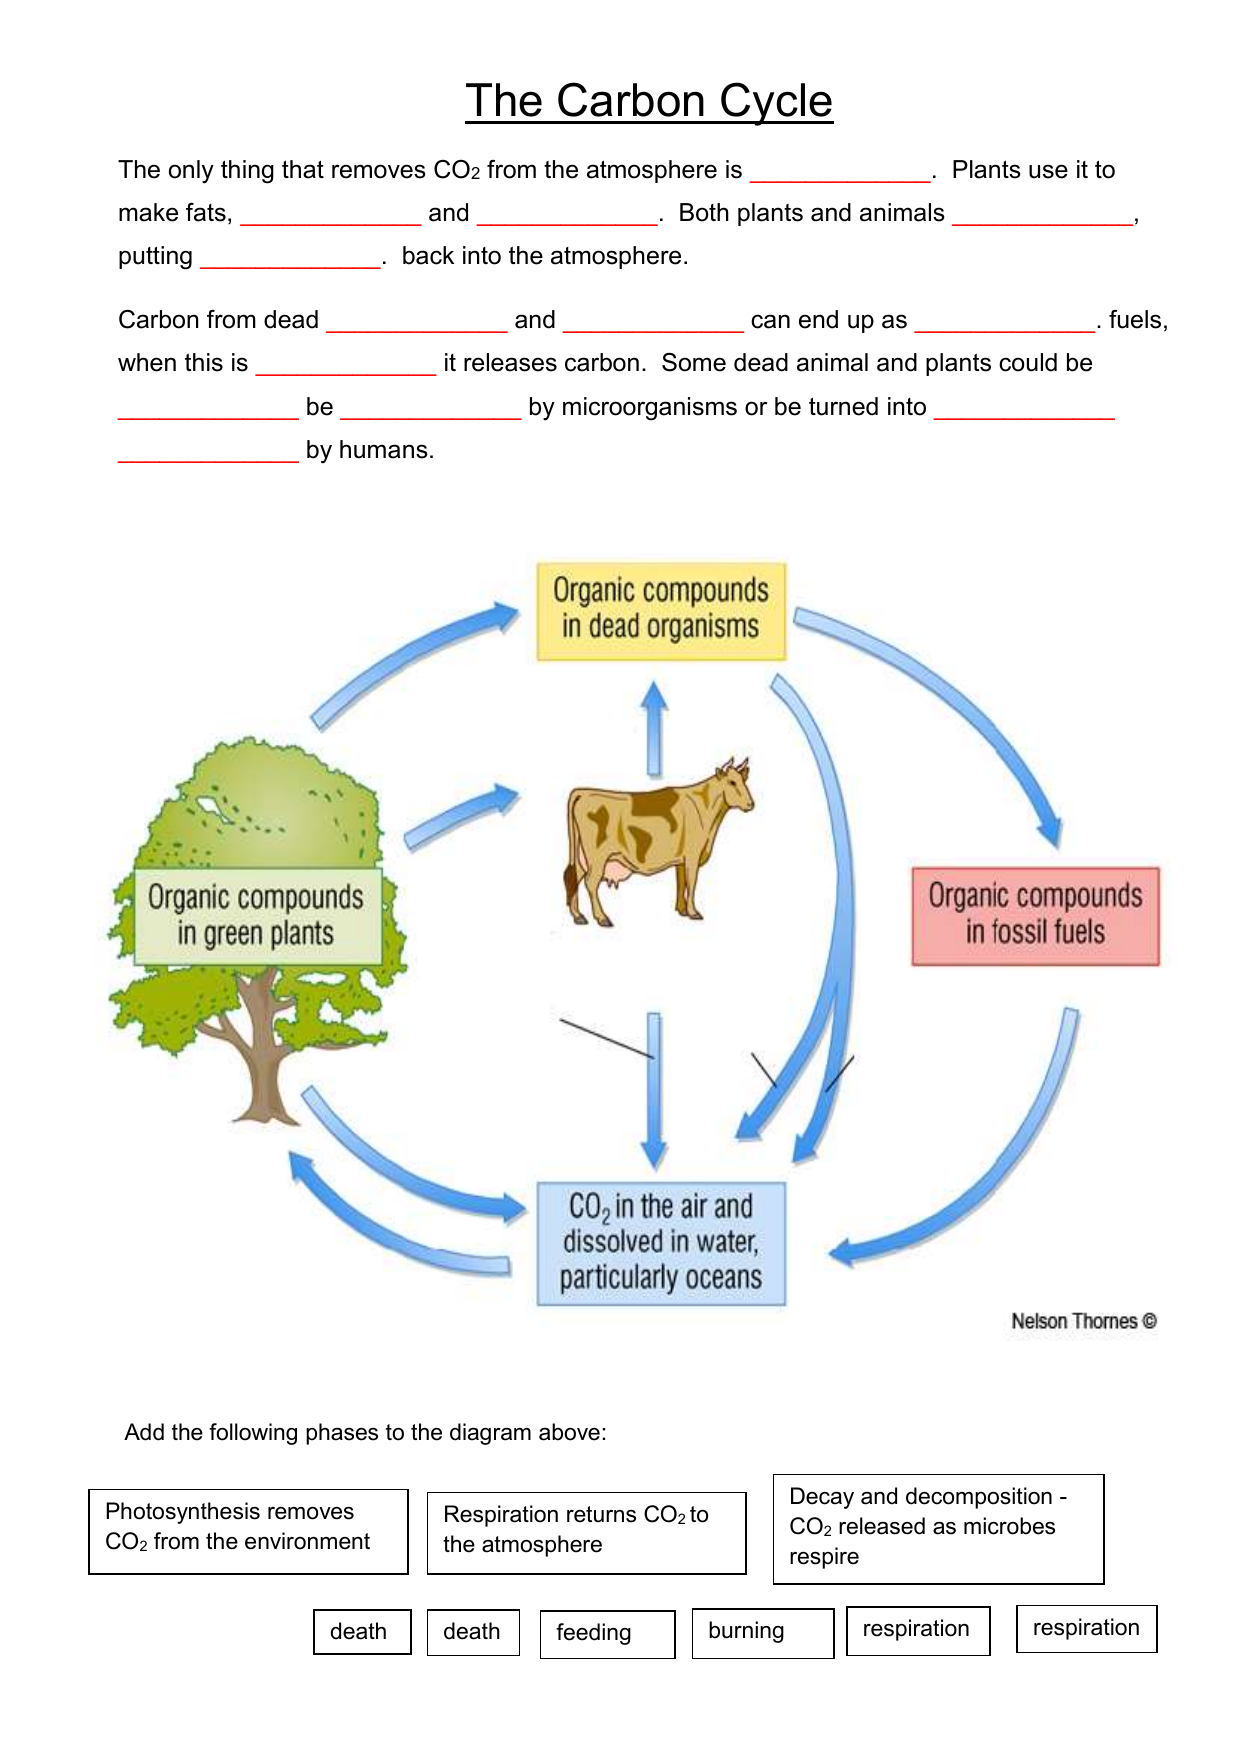 carbon-cycle-activity-worksheet-free-download-goodimg-co